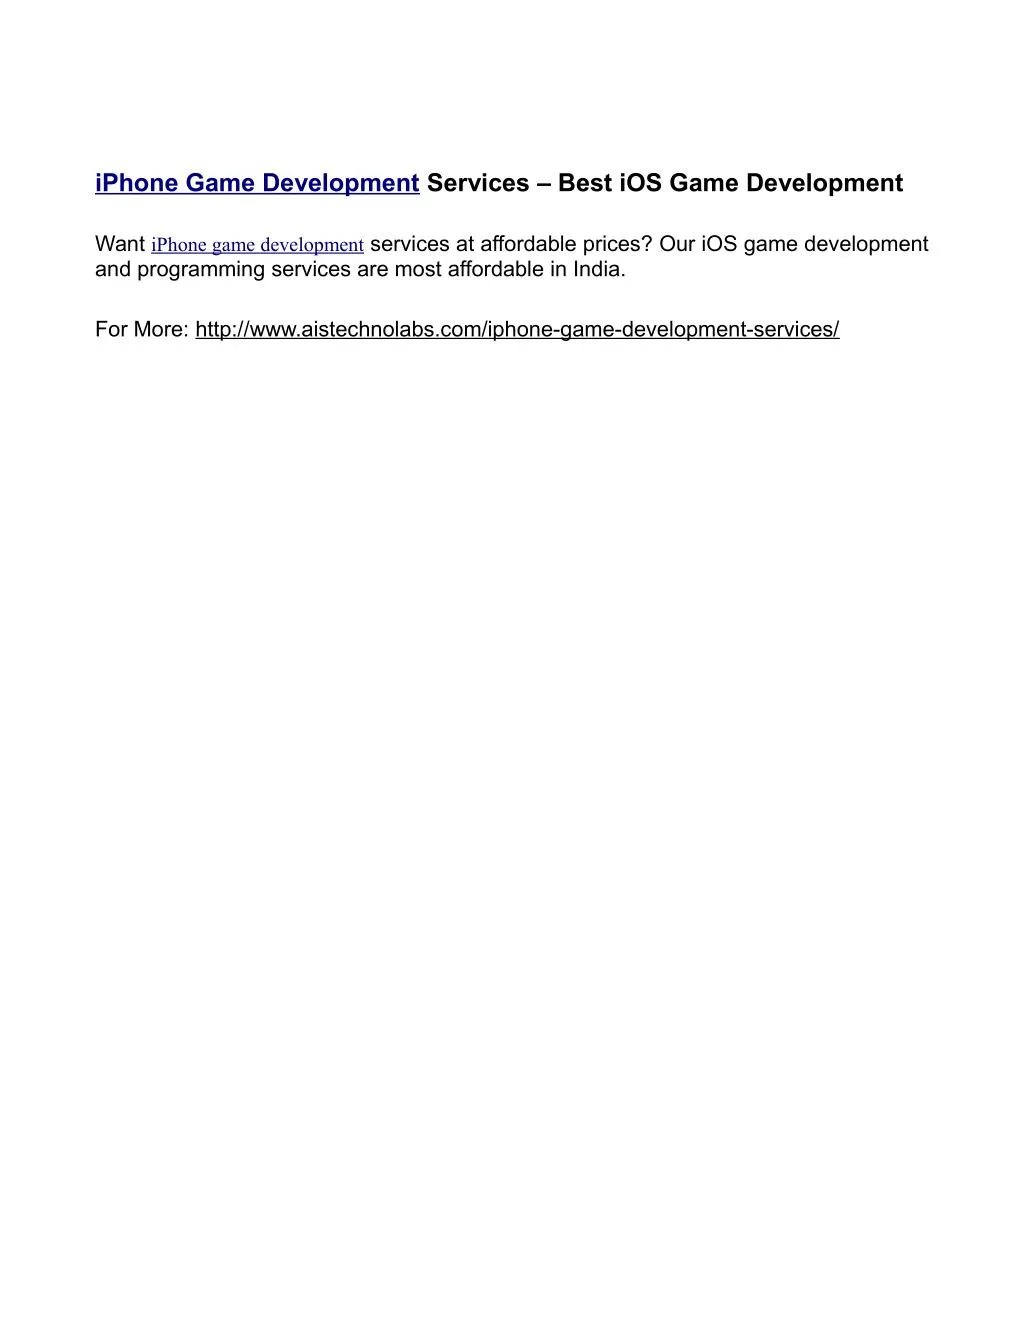 iphone game nevelopment services best ios game